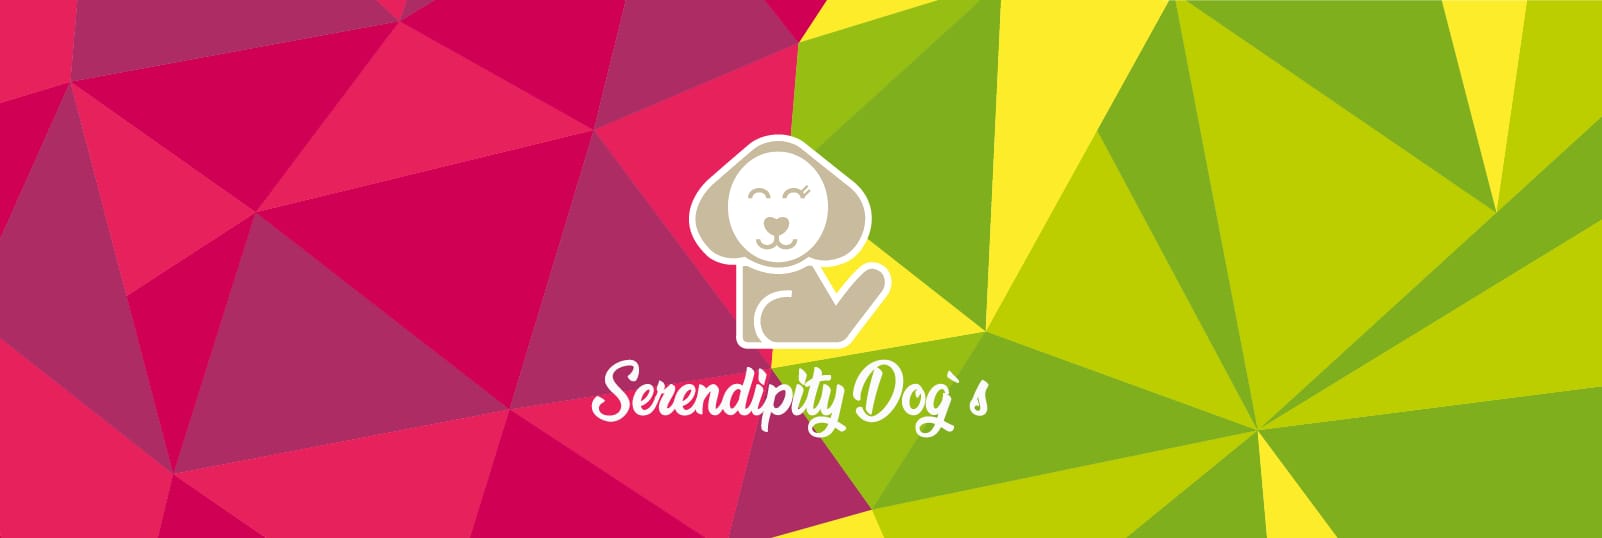 Images Serendipity Dog's